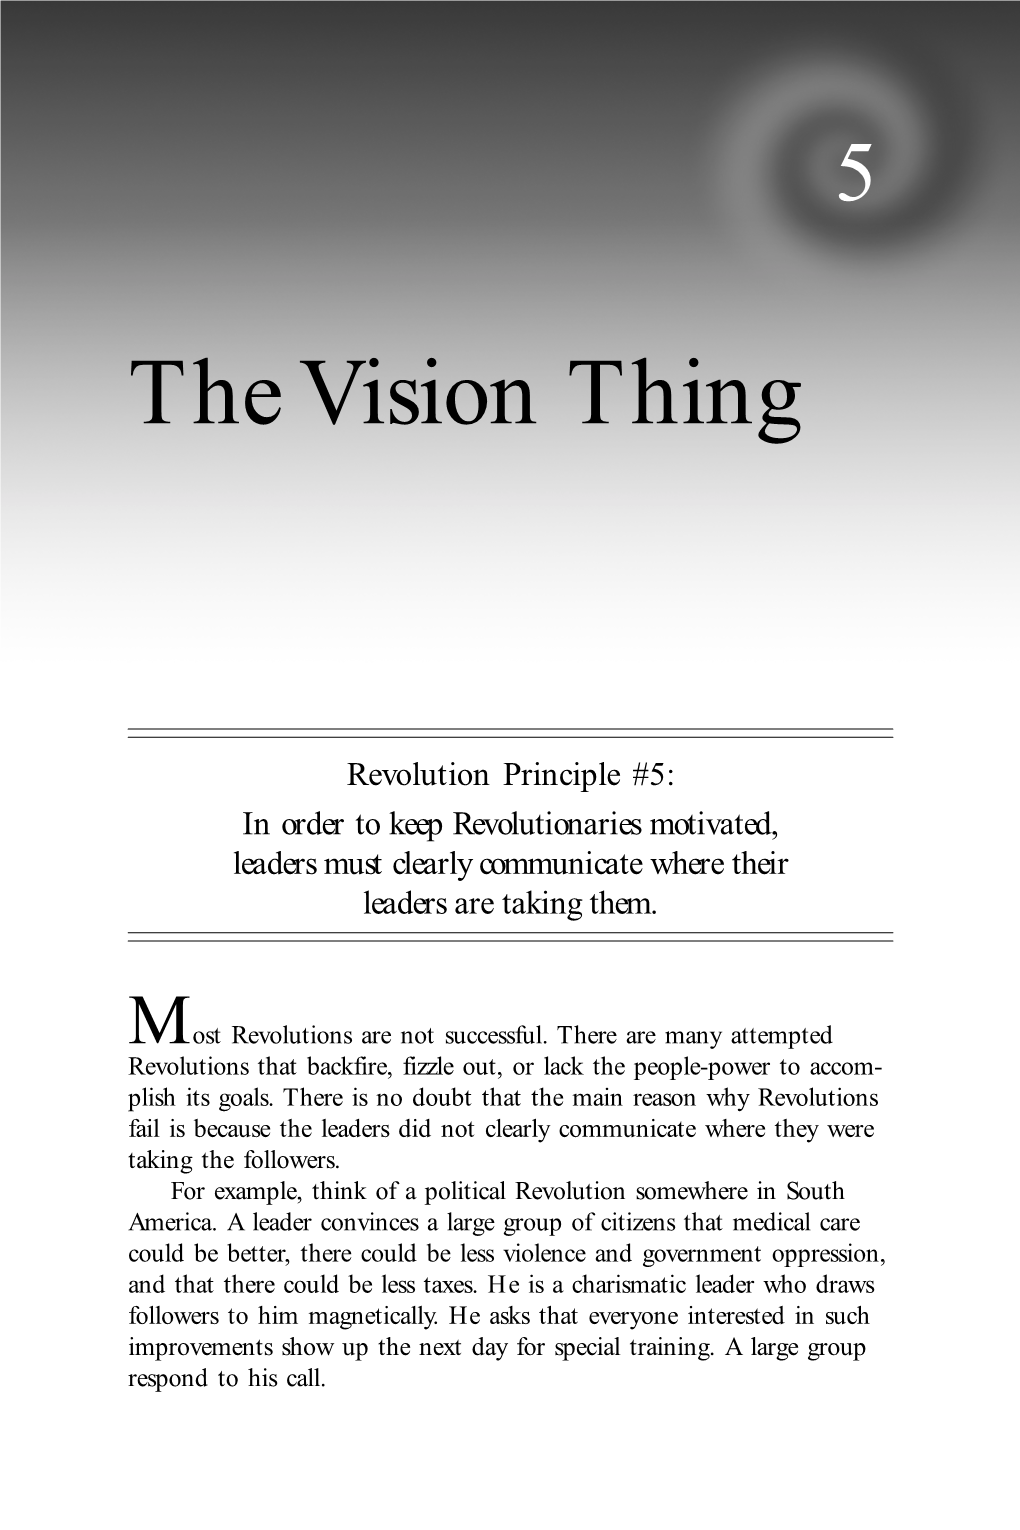 The Vision Thing